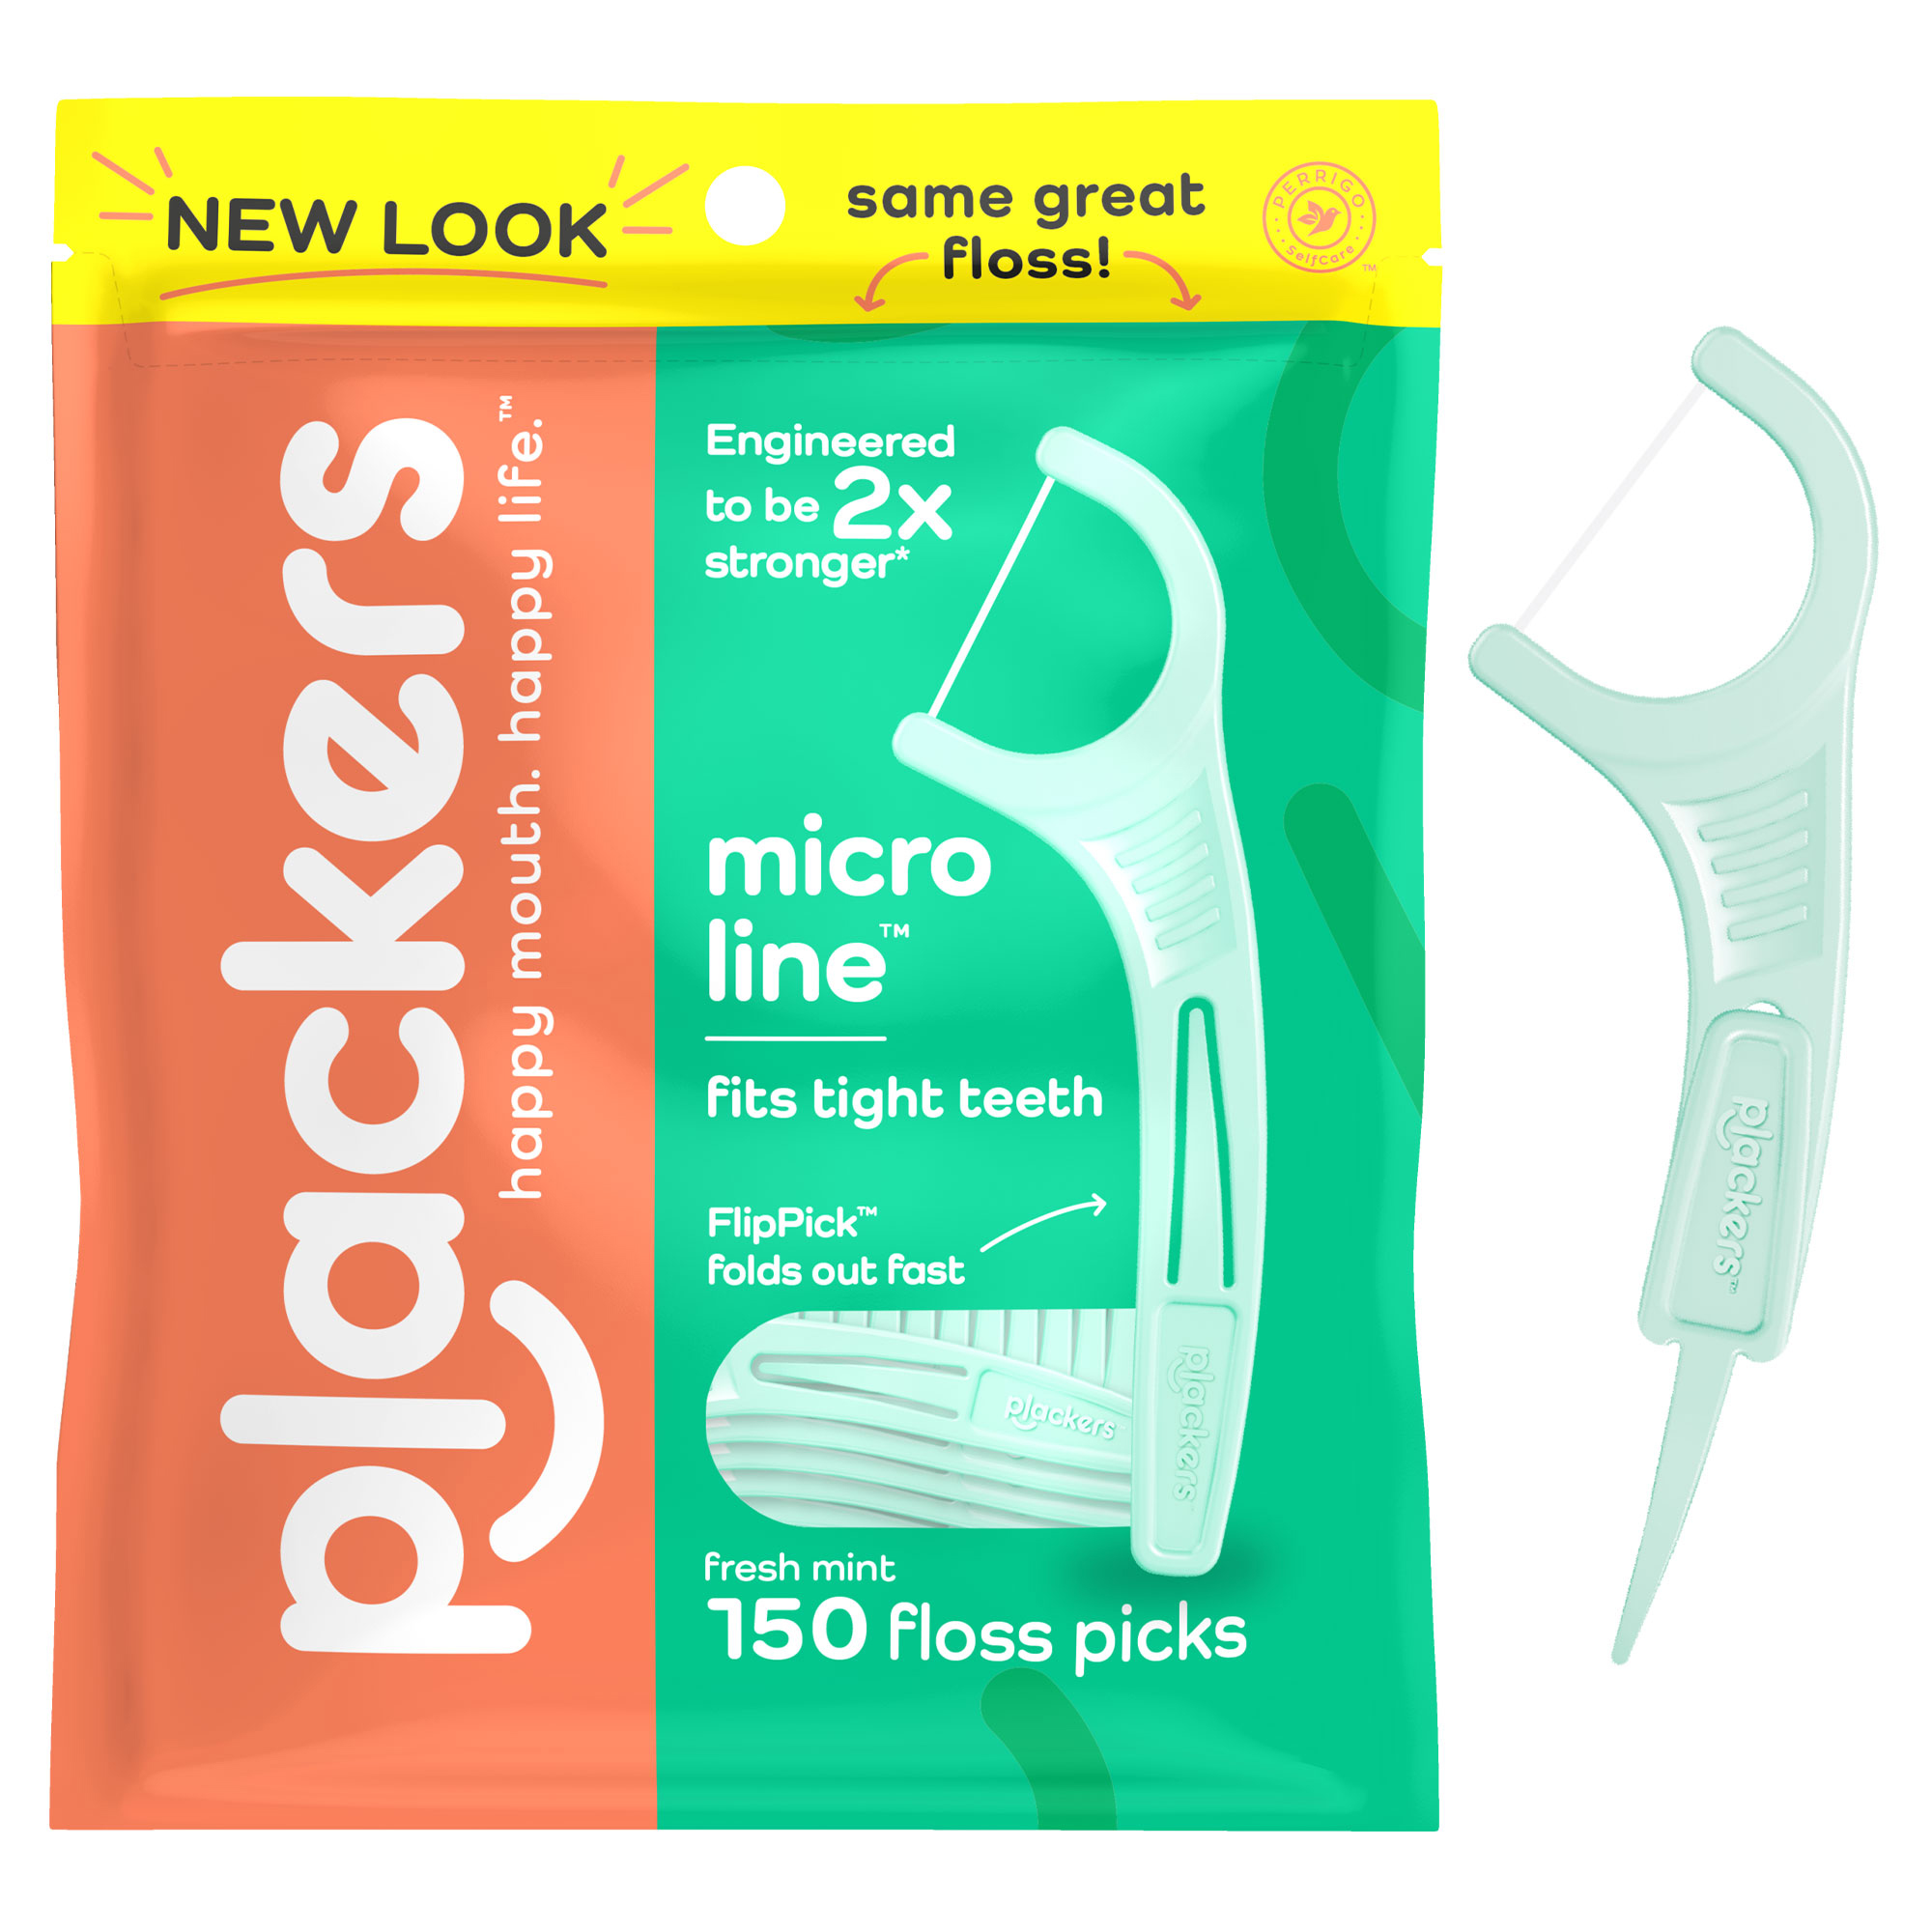 Plackers Micro Line Dental Floss Picks, Fold-Out FlipPick, Tuffloss, Fresh Mint Flavor, 150 Count - image 1 of 9